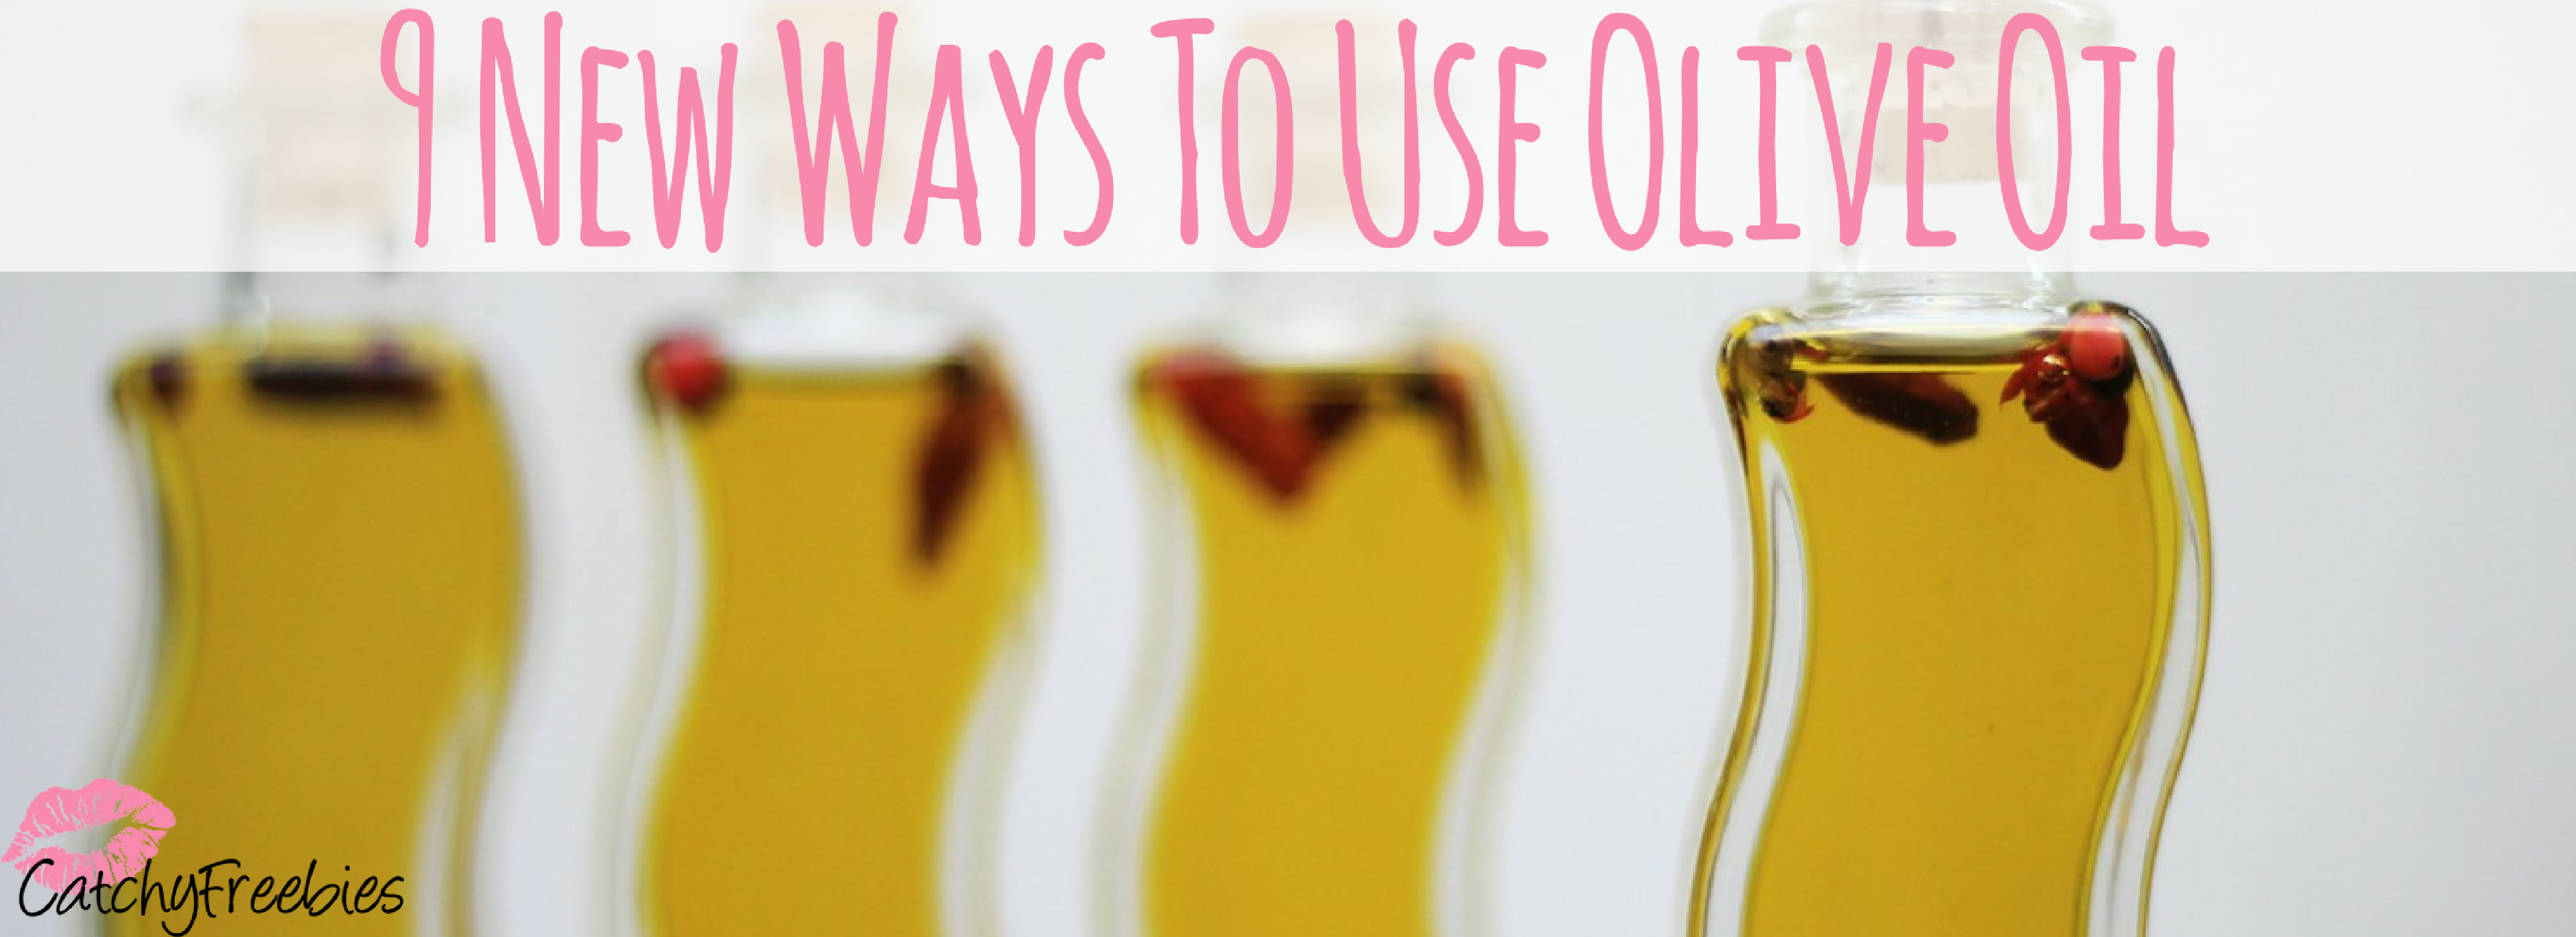 9 New Ways To Use Olive Oil